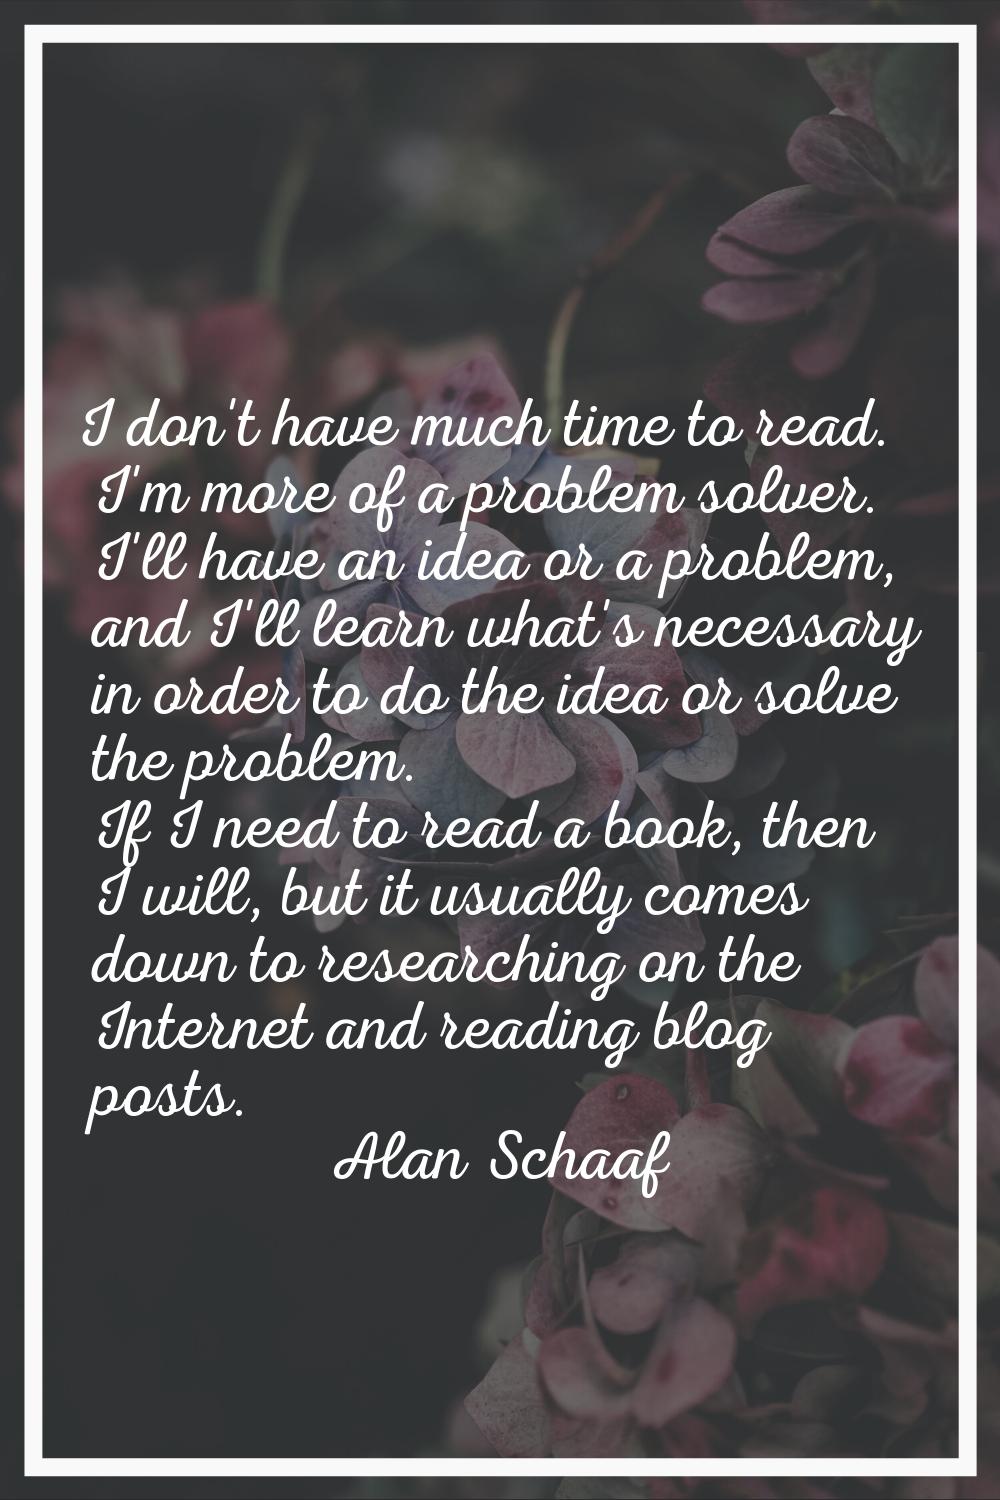 I don't have much time to read. I'm more of a problem solver. I'll have an idea or a problem, and I